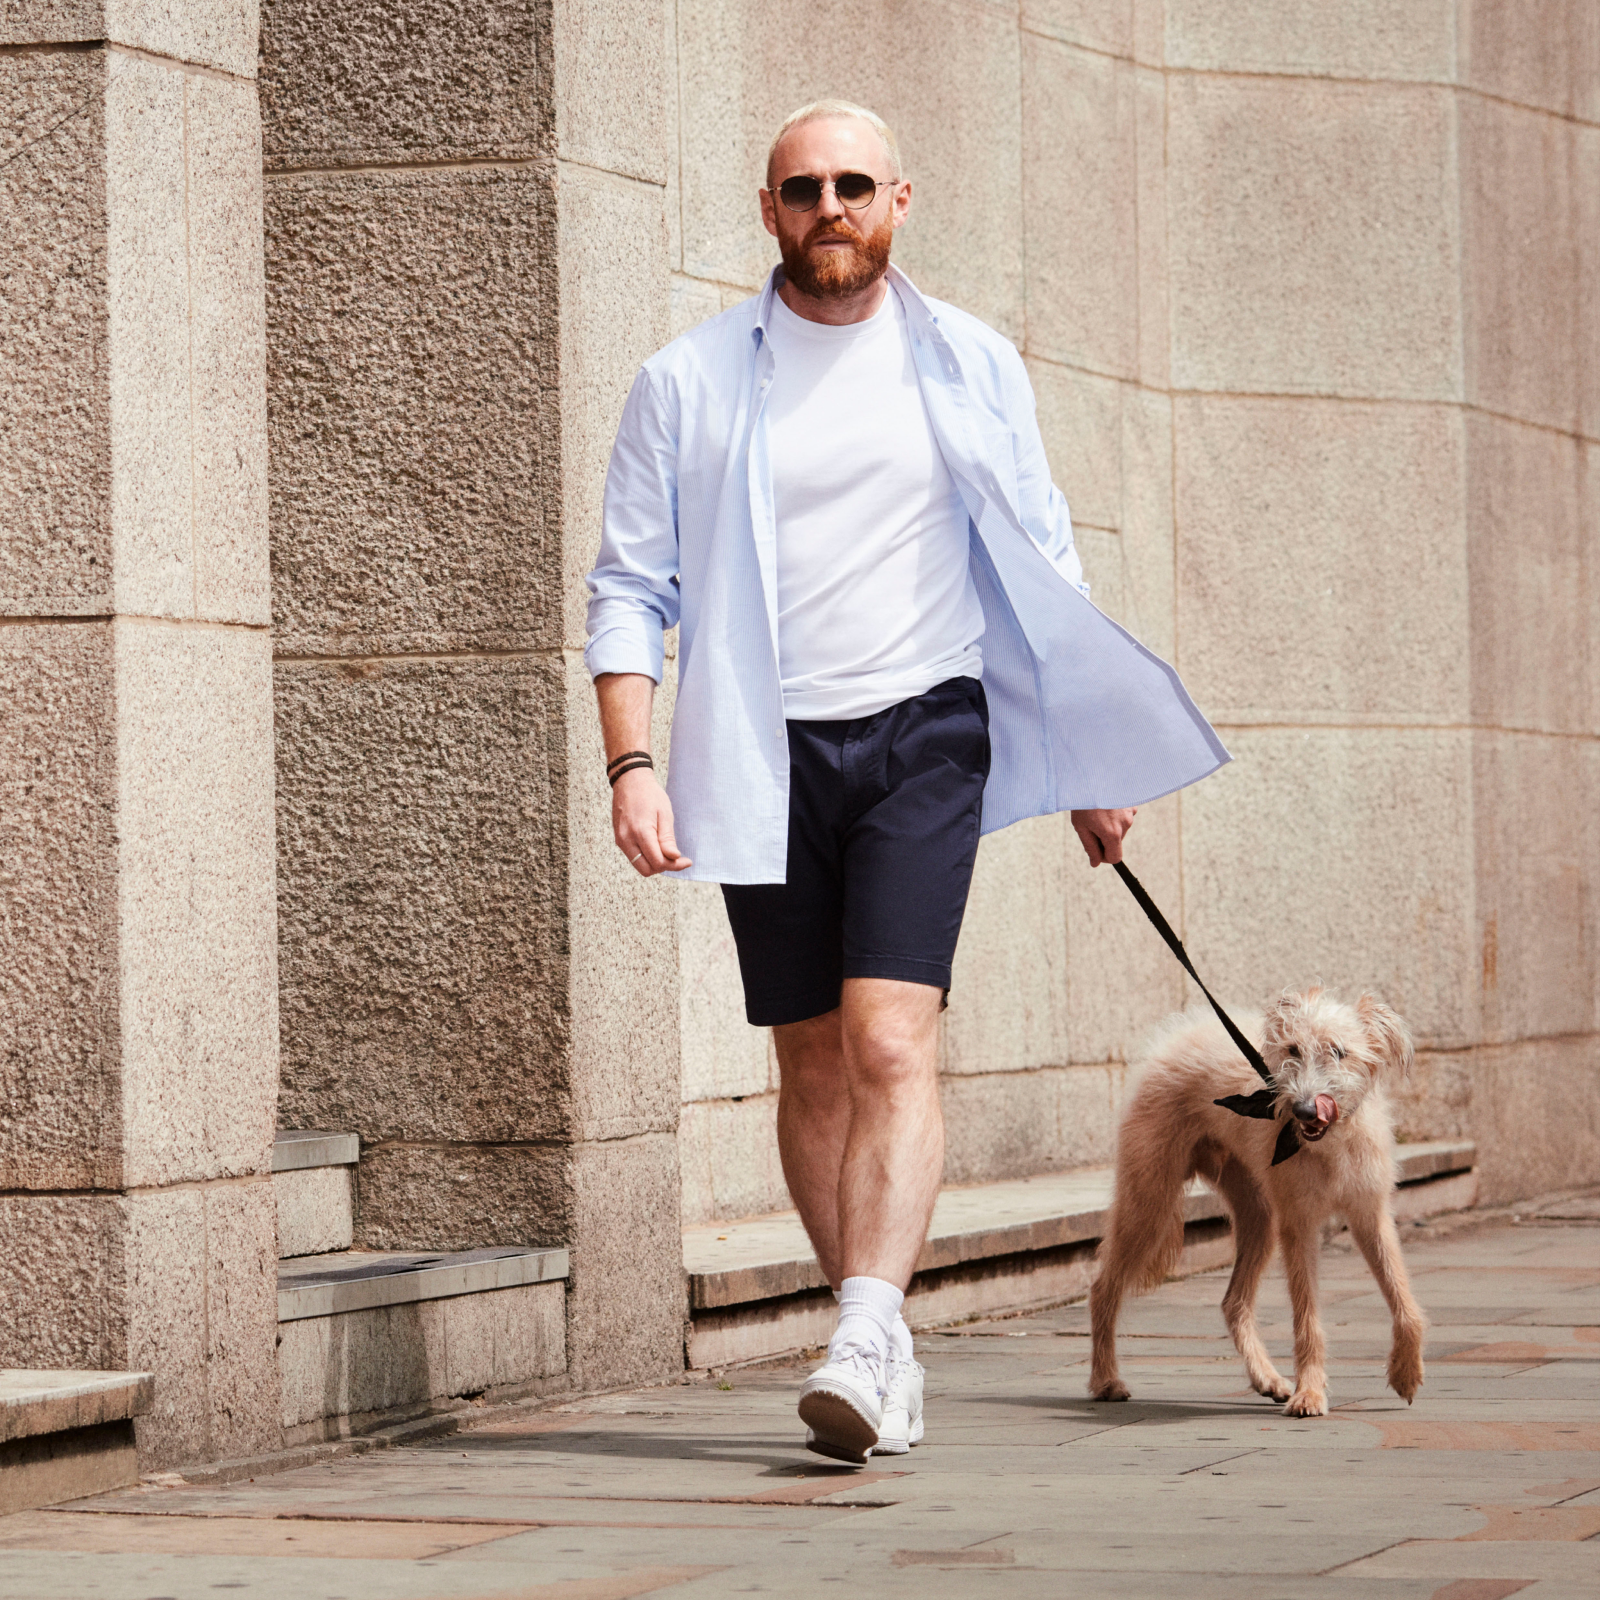 Man taking a stroll with his dog